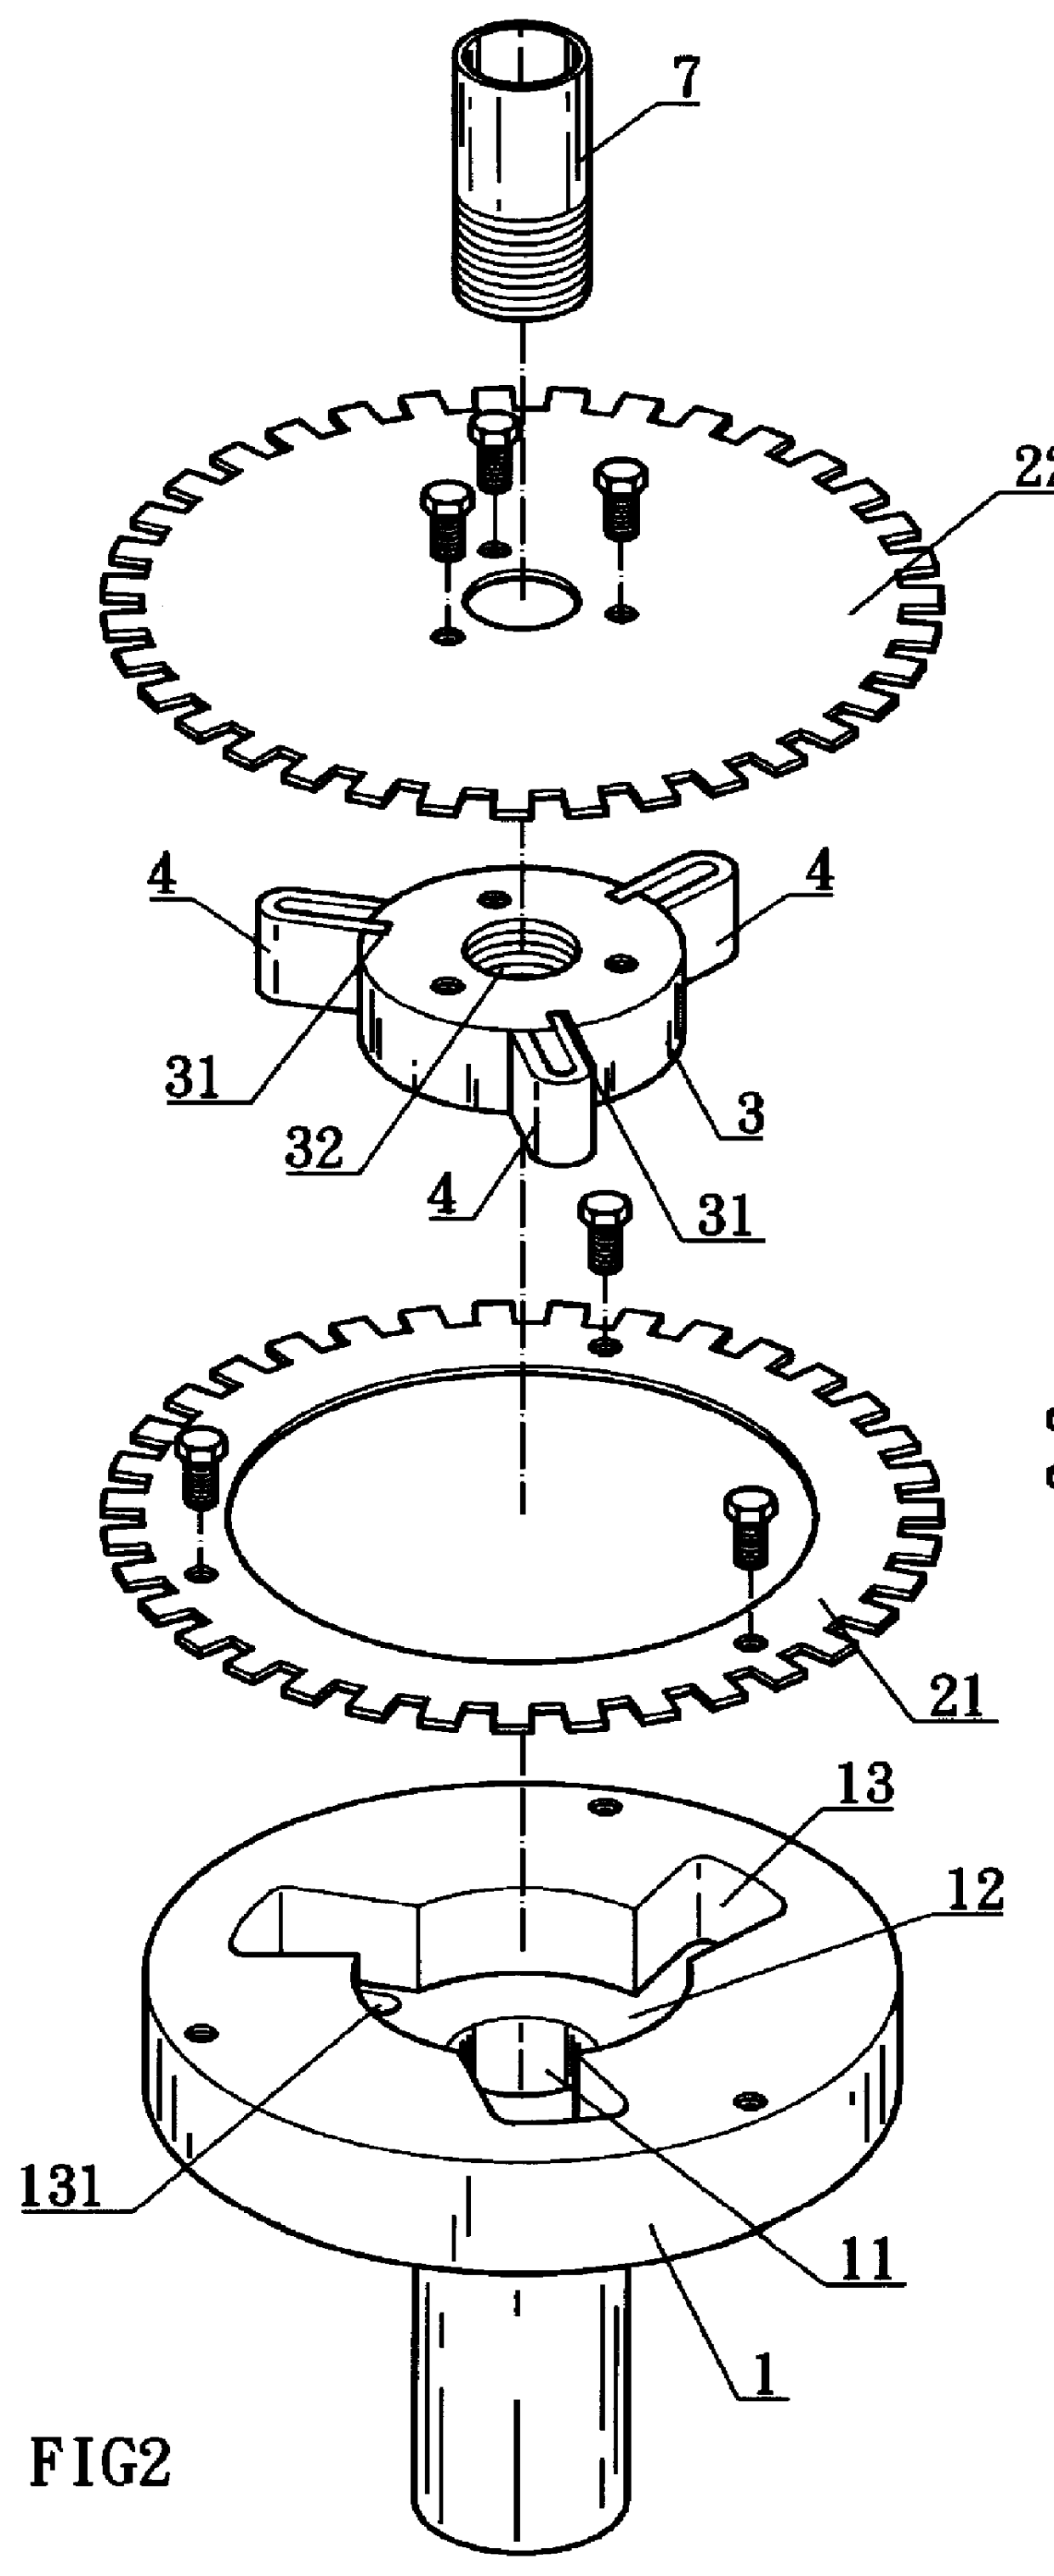 Detecting device capable of measuring speed and torque simultaneously